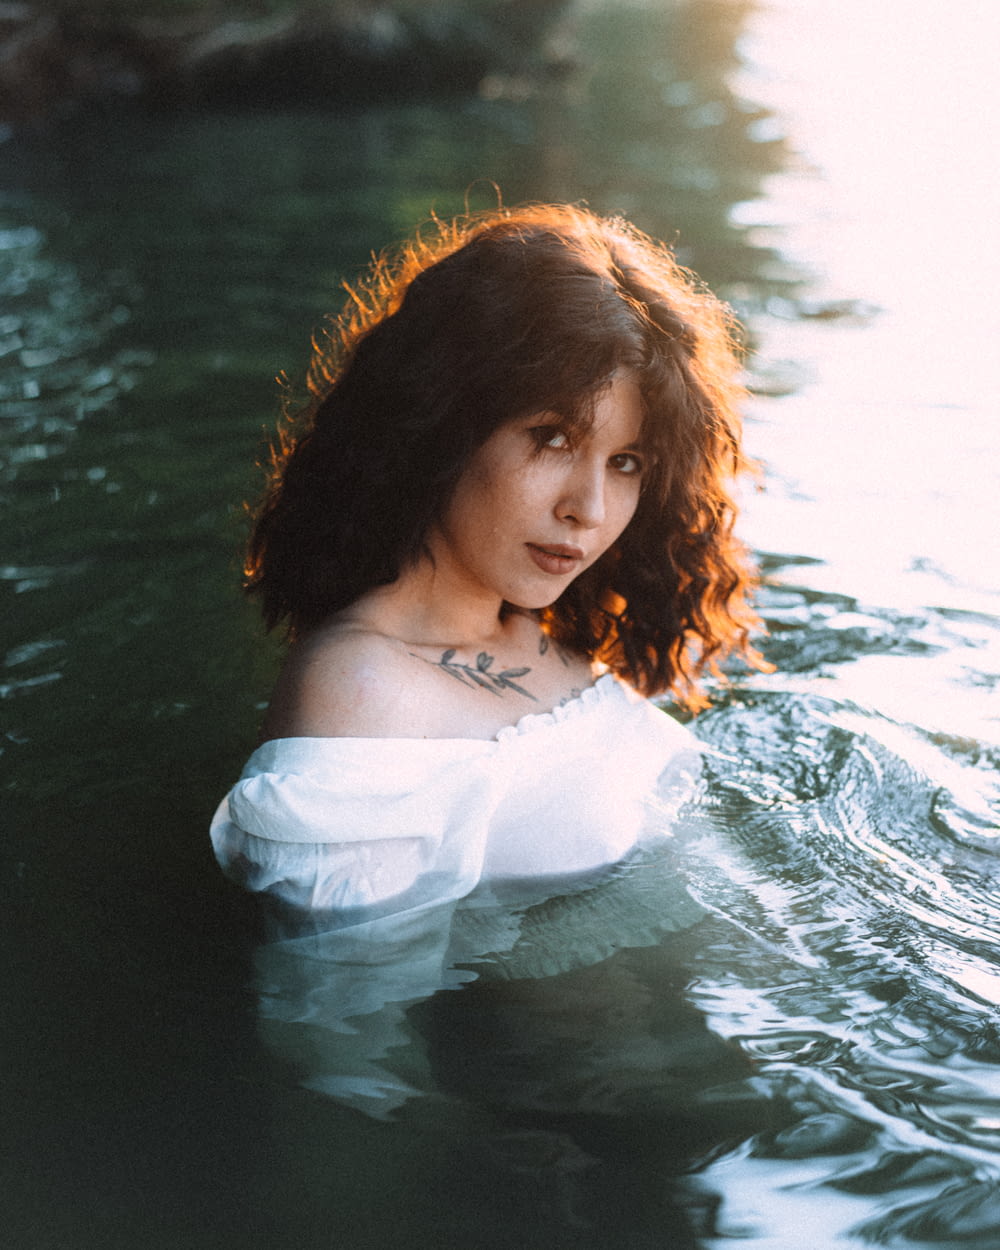 a woman in a body of water wearing a white shirt